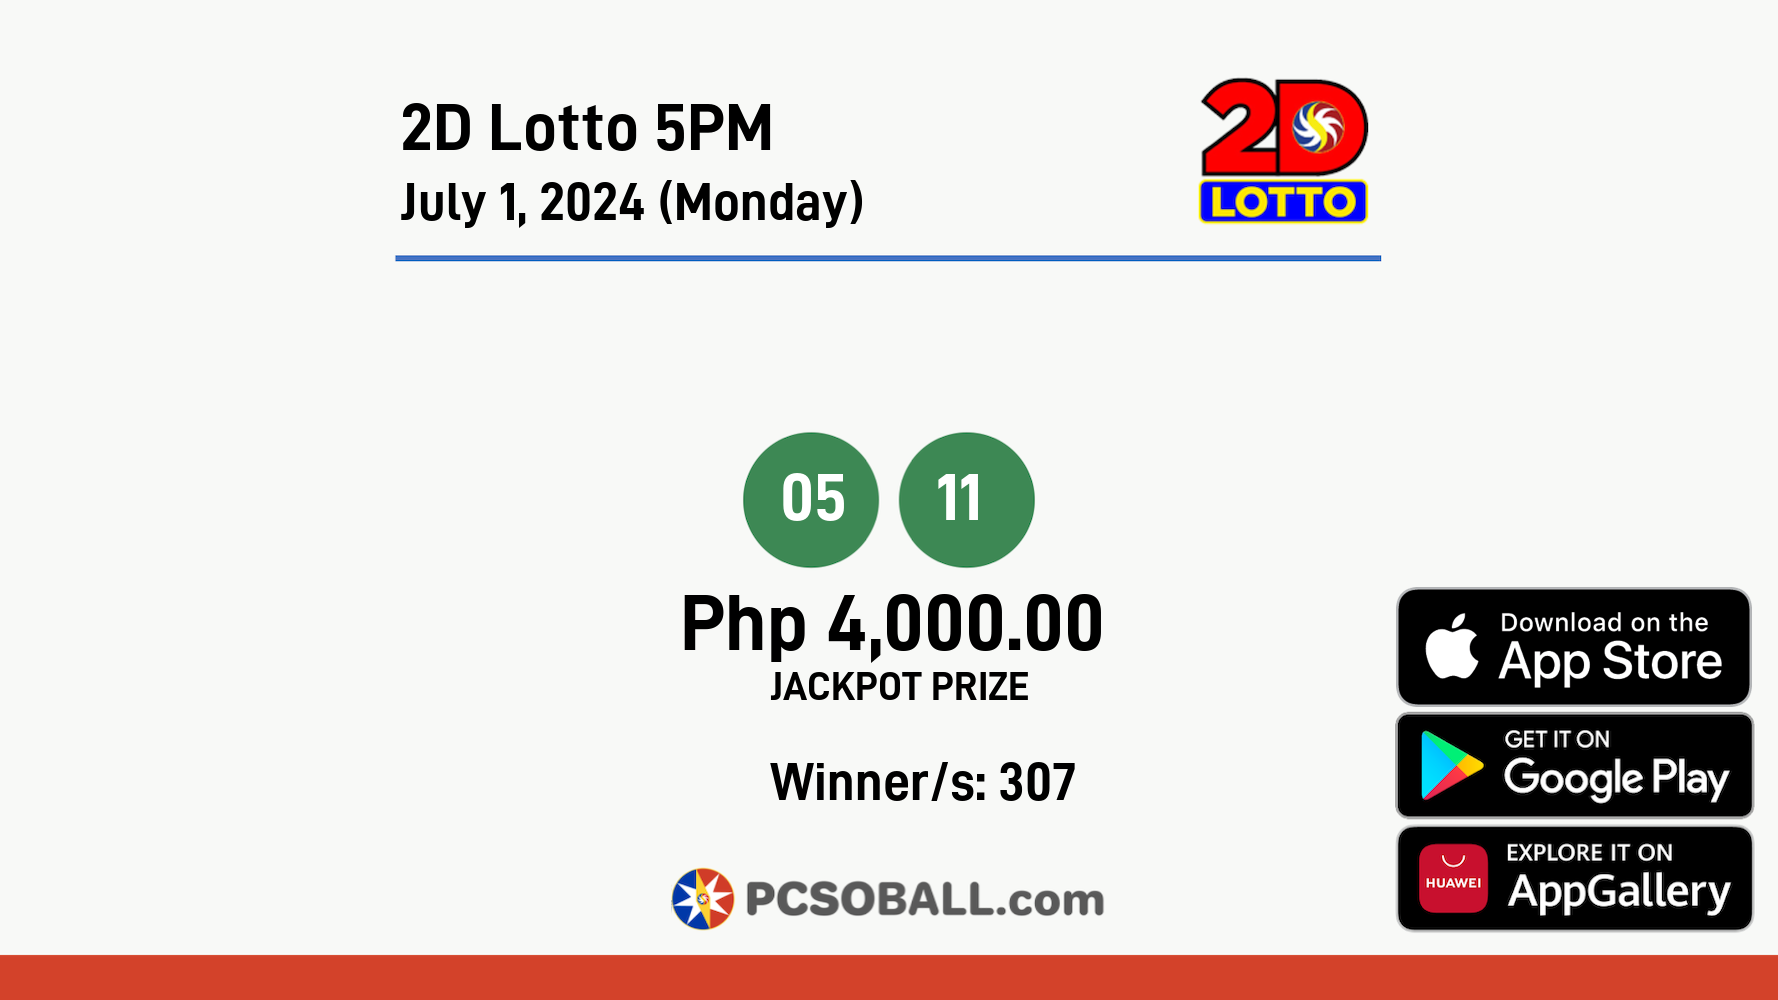 2D Lotto 5PM July 1, 2024 (Monday) Result